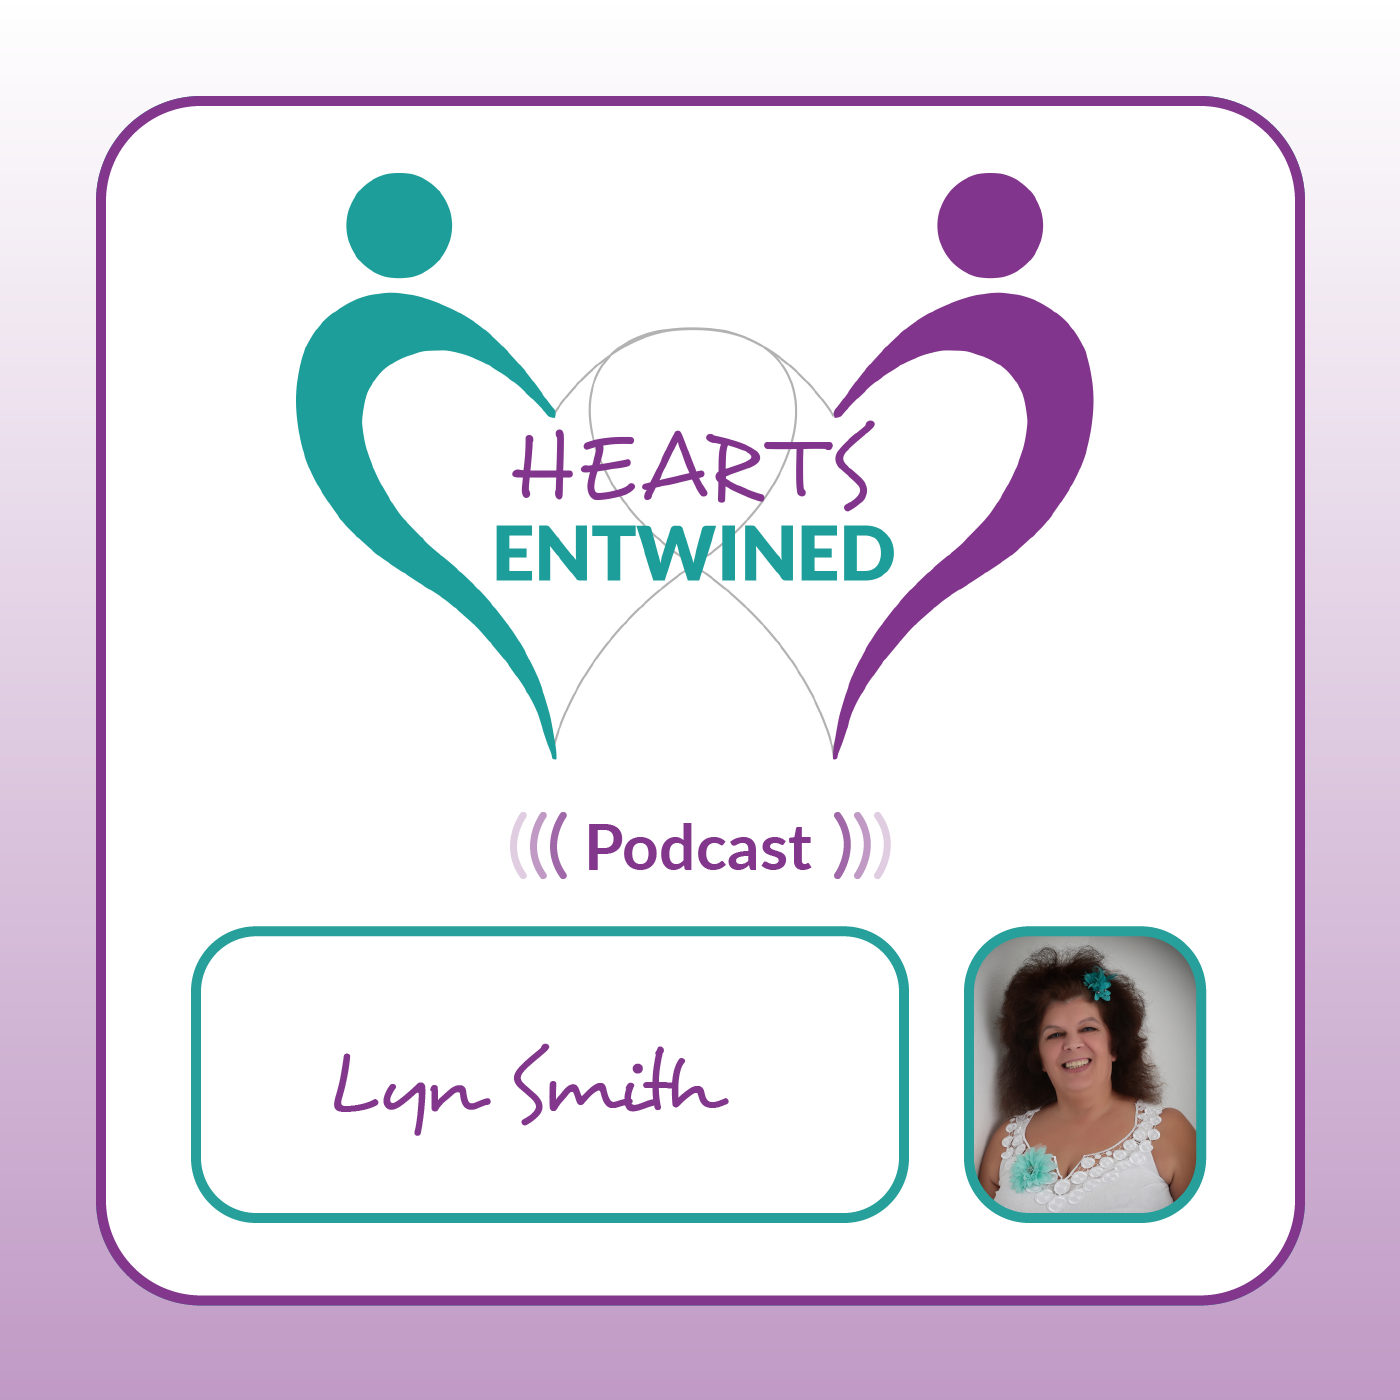 How To Use The Power Of Your Feminine Energy - with Lyn Smith